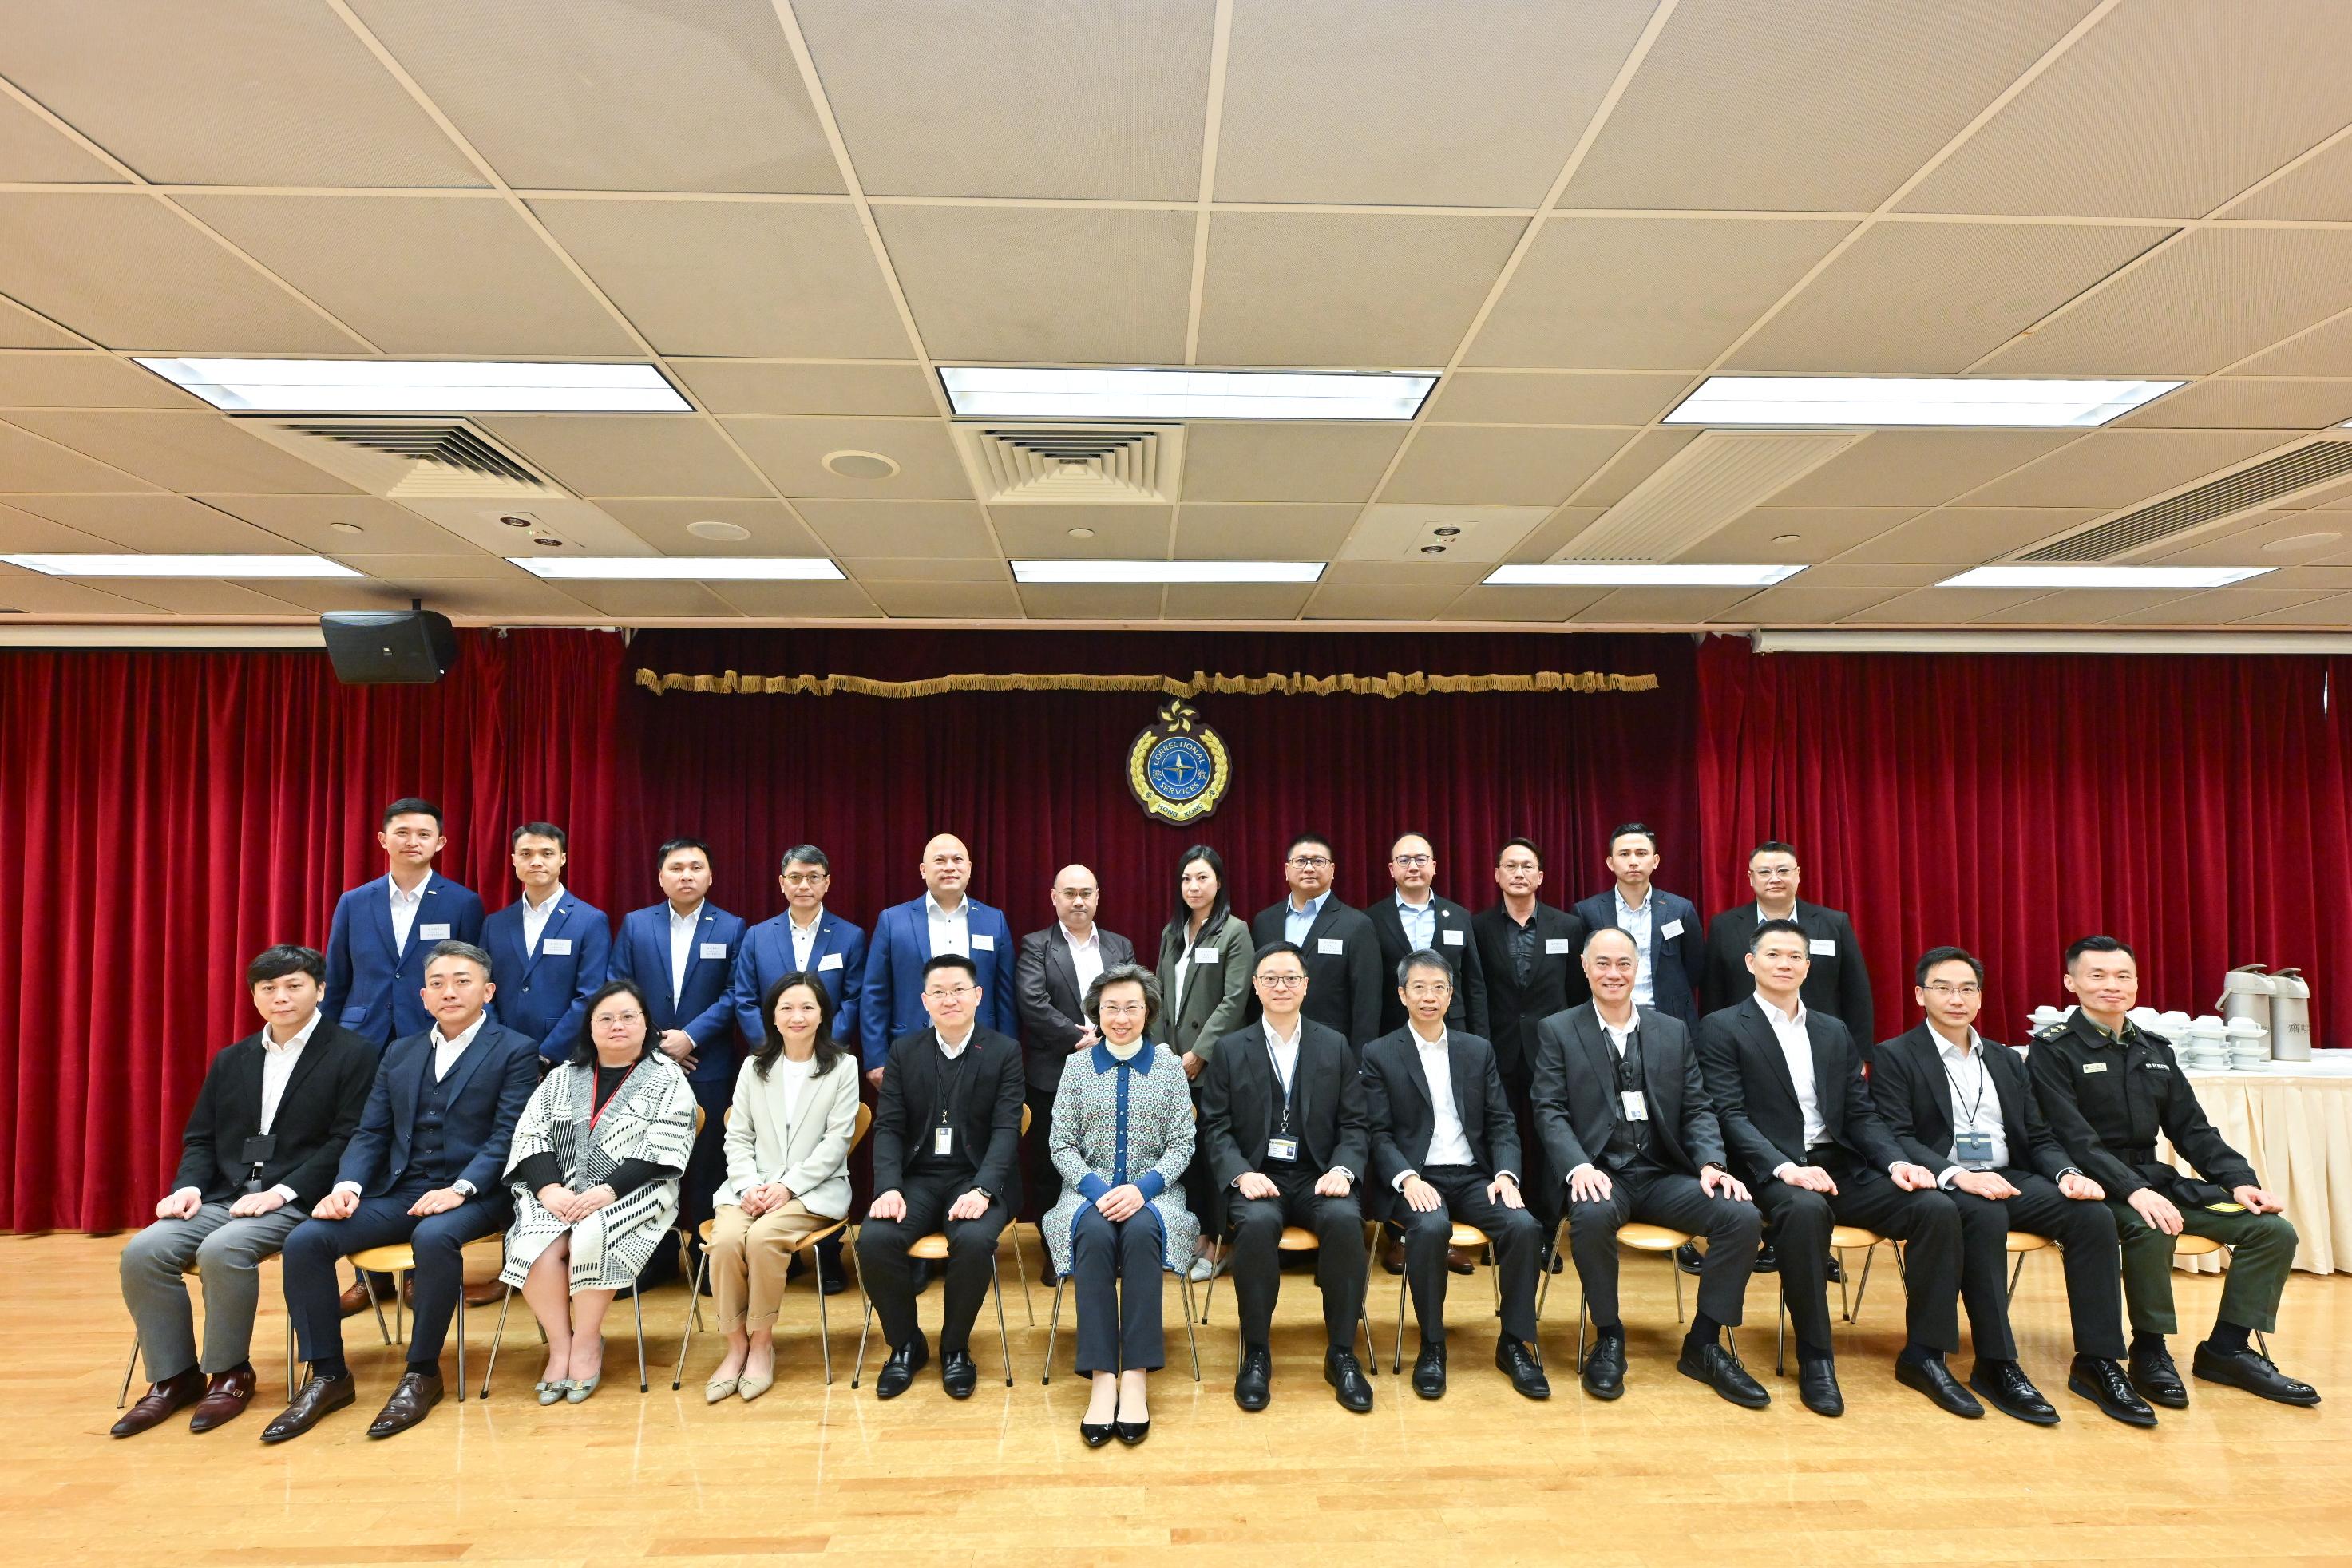 The Secretary for the Civil Service, Mrs Ingrid Yeung, visited the Correctional Services Department and toured the Lai Chi Kok Reception Centre today (February 7). Photo shows Mrs Yeung (front row, sixth left); the Permanent Secretary for the Civil Service, Mr Clement Leung (front row, fifth right); the Commissioner of Correctional Services, Mr Wong Kwok-hing (front row, sixth right); and directorate staff as well as staff representatives of various grades in the department.